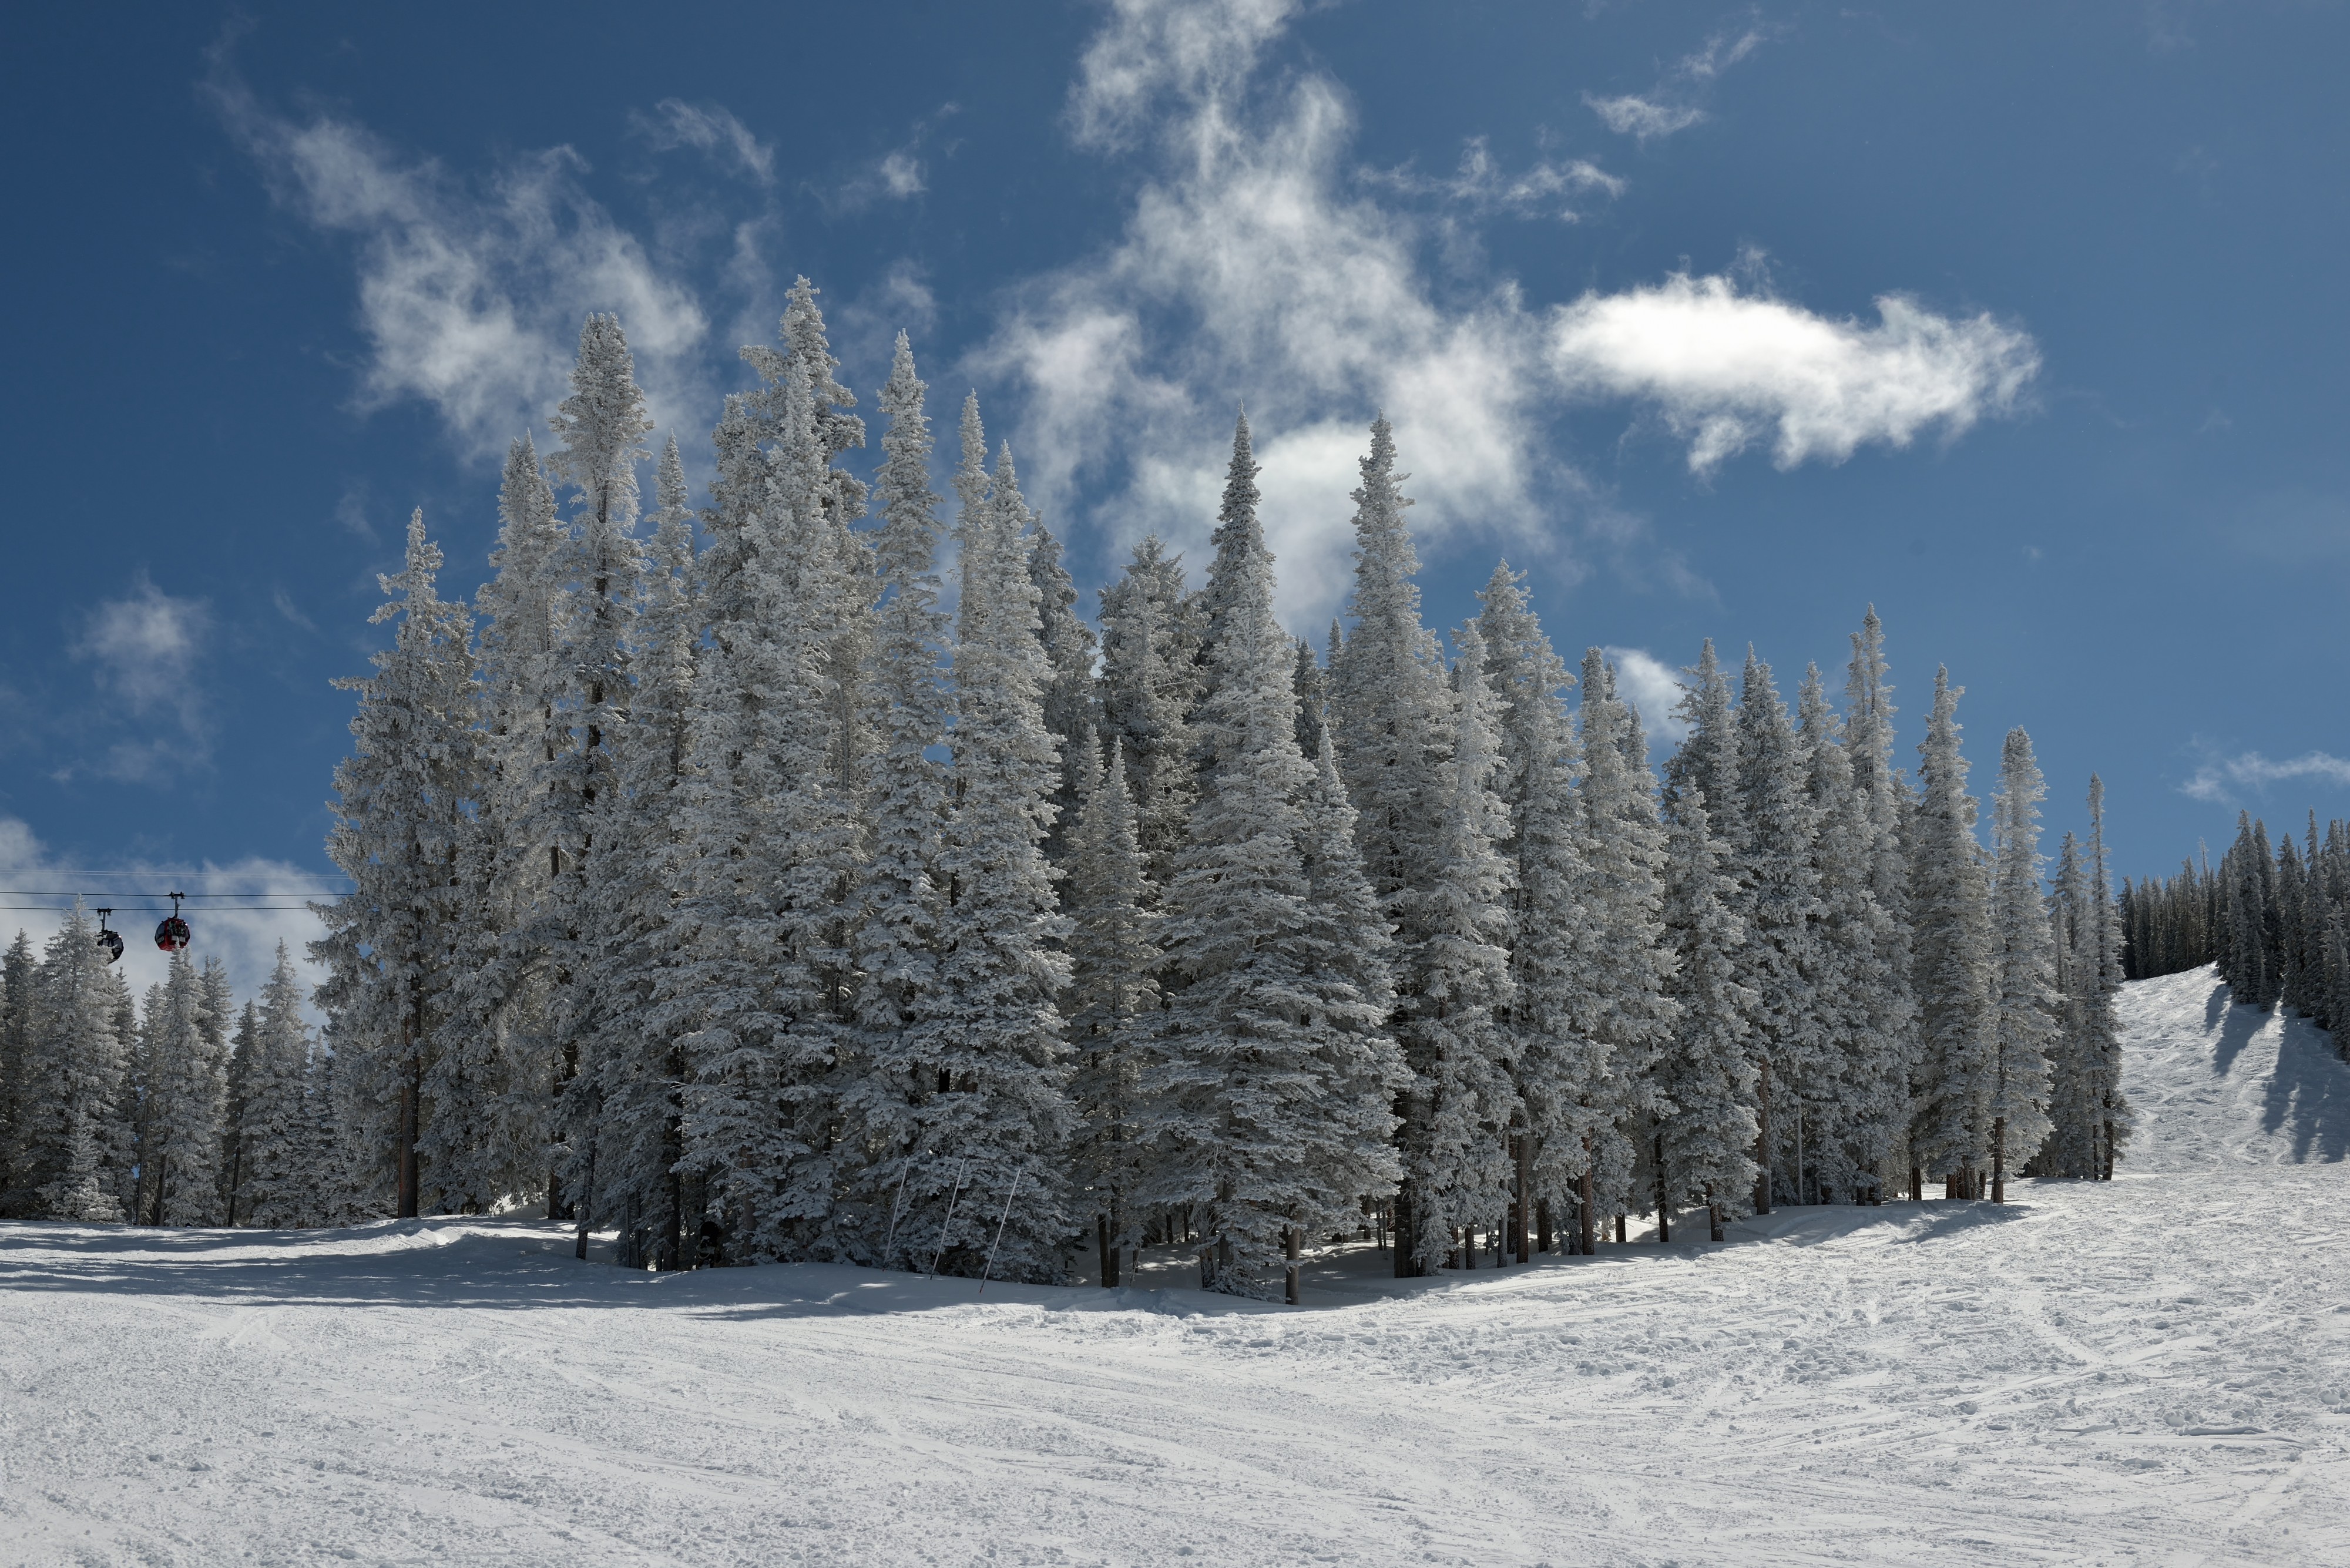 Aspen Mountain firs with fresh snow